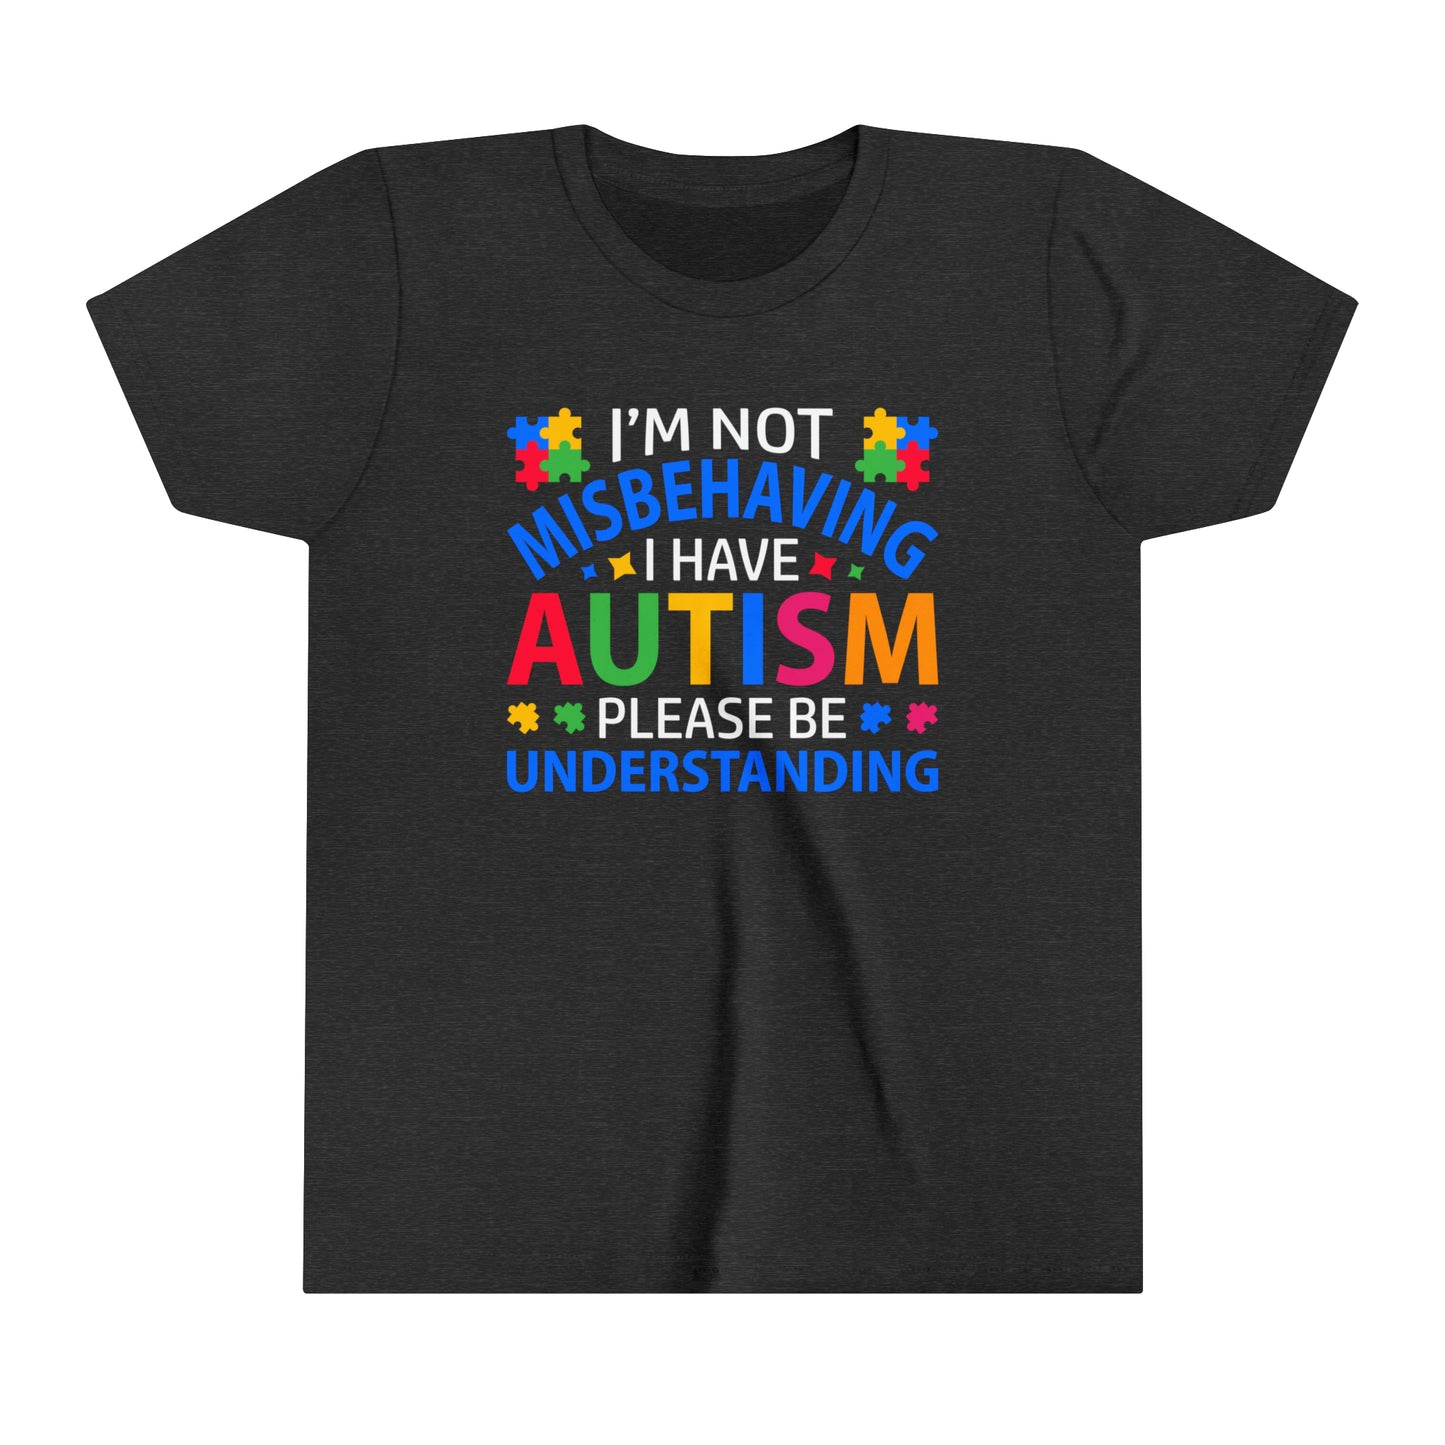 I'm not misbehaving, I have Autism, Please Be Understanding Advocate Youth Shirt